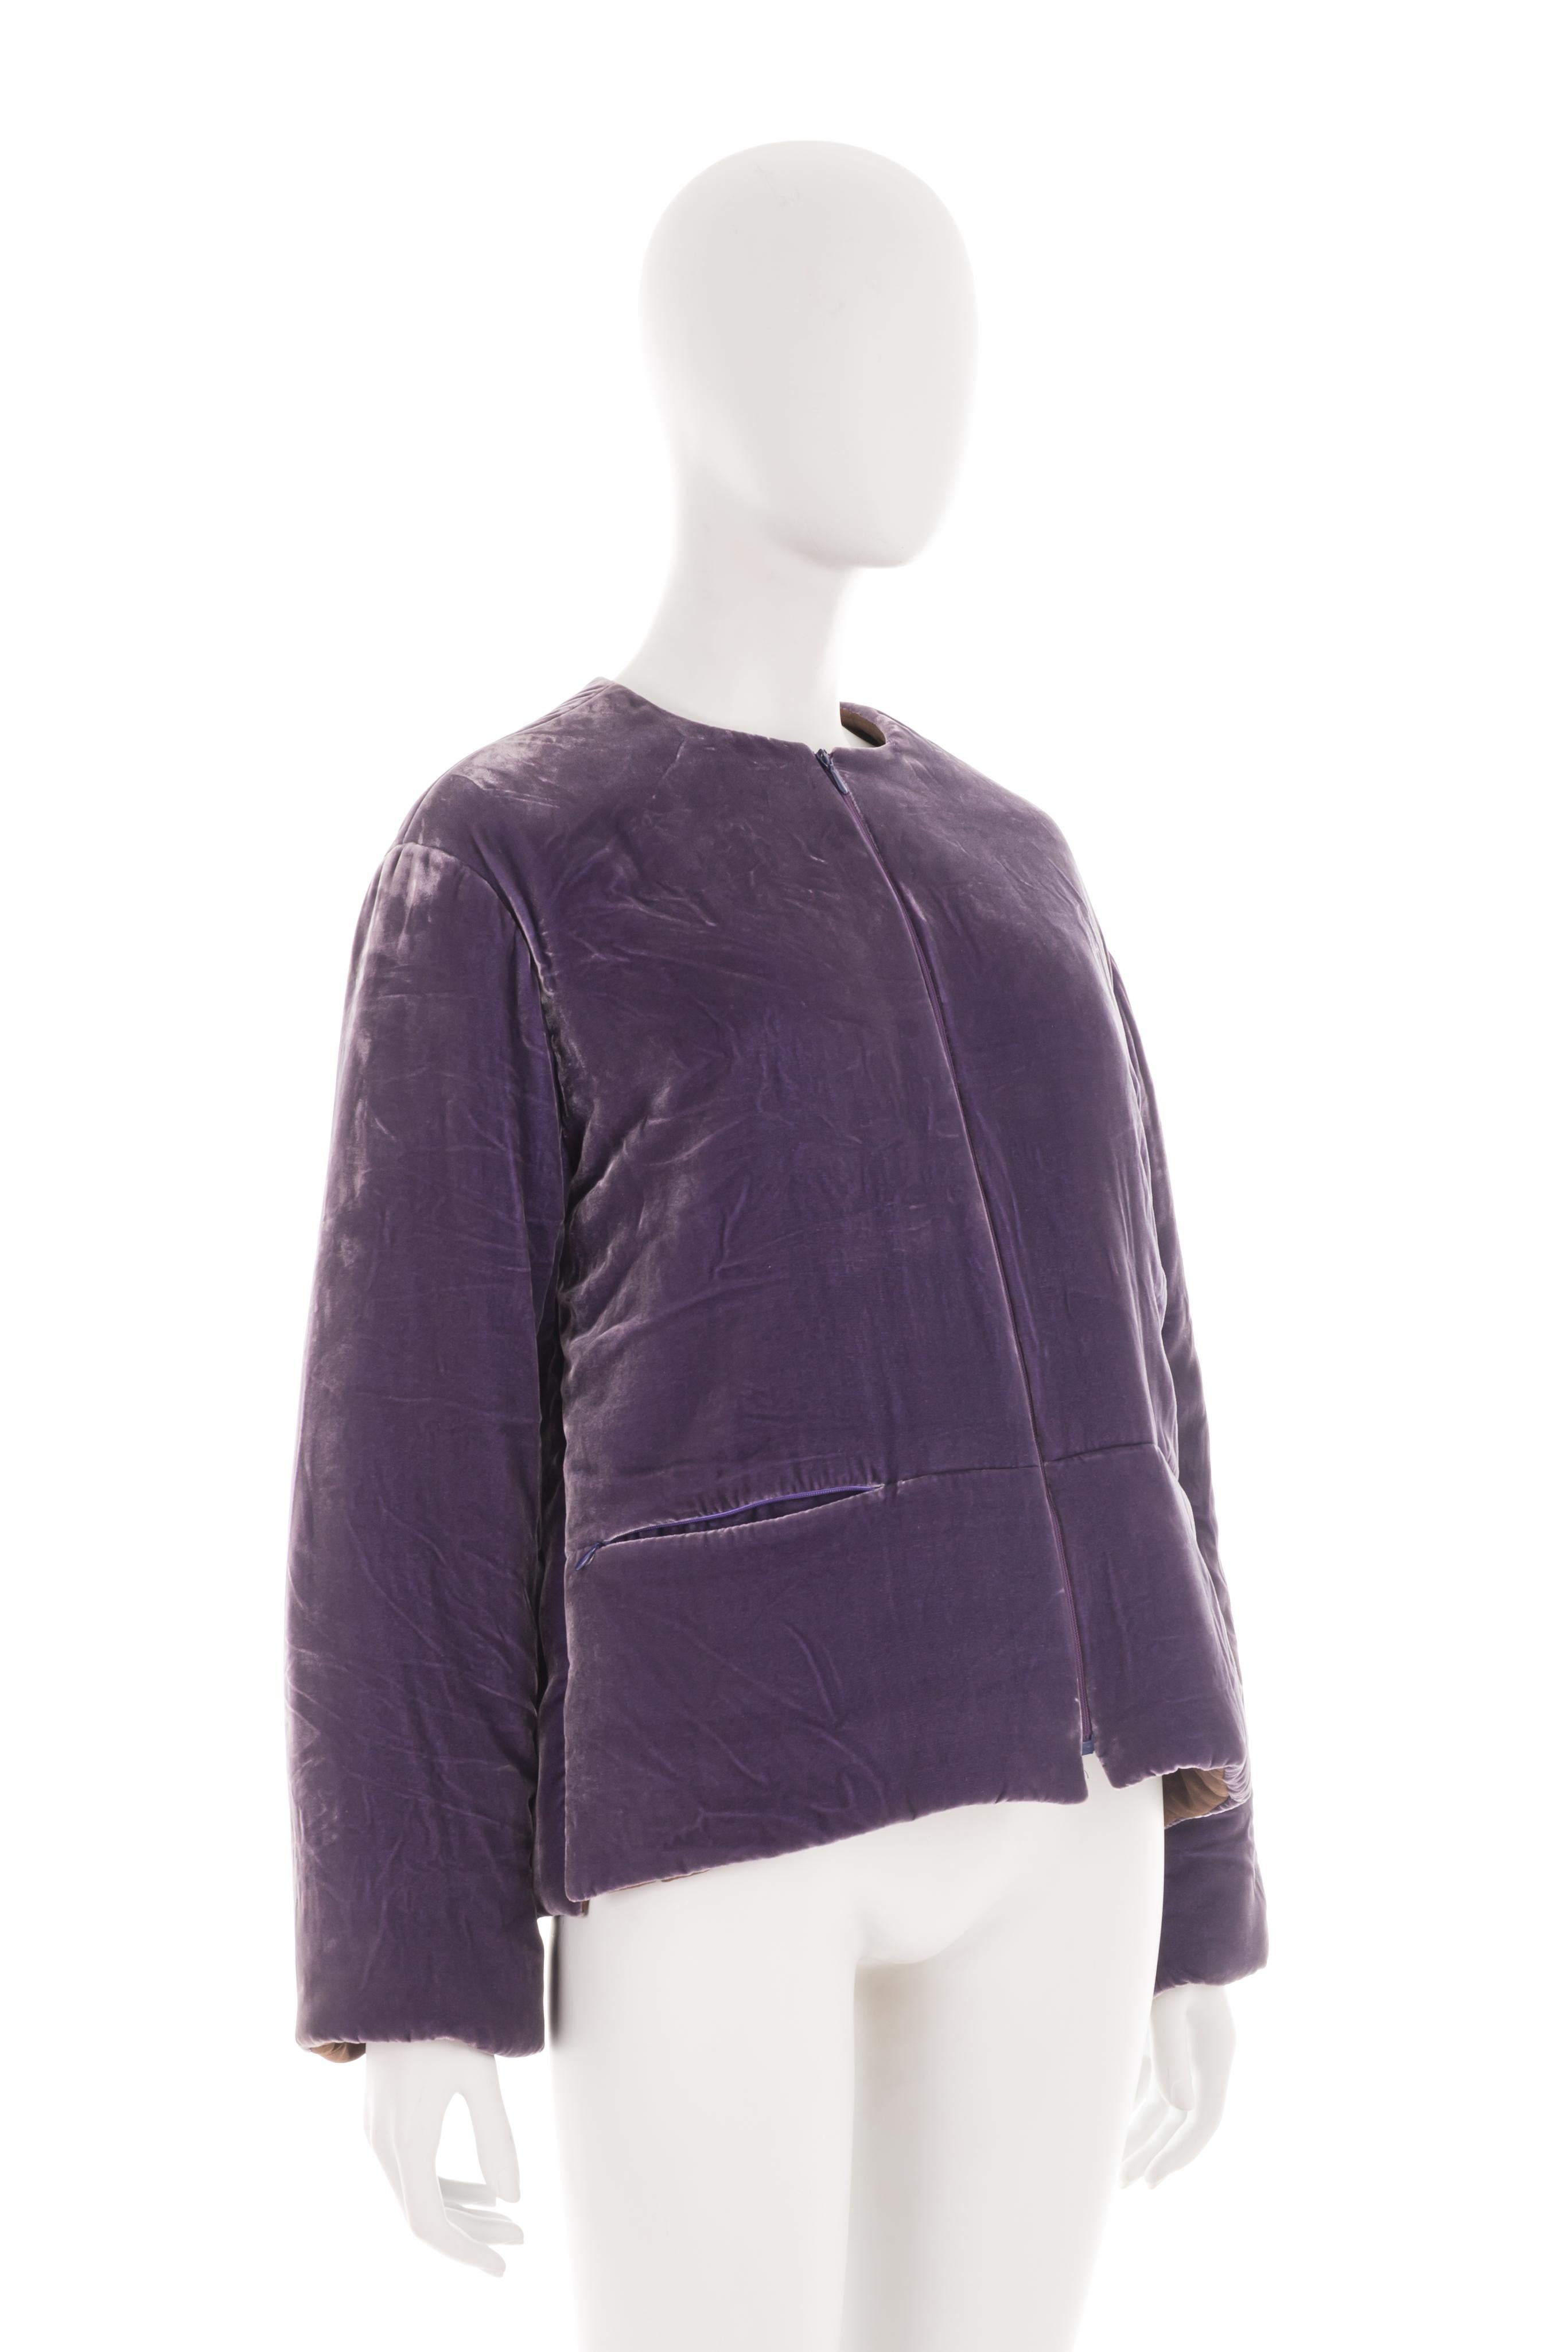 - Fall-winter 2000 collection 
- Sold by Gold Palms Vintage
- Round lapelless neckline
- Purple velvet puffed jacket
- Front pockets
- Size: IT 42 - UK 10 - US 8
